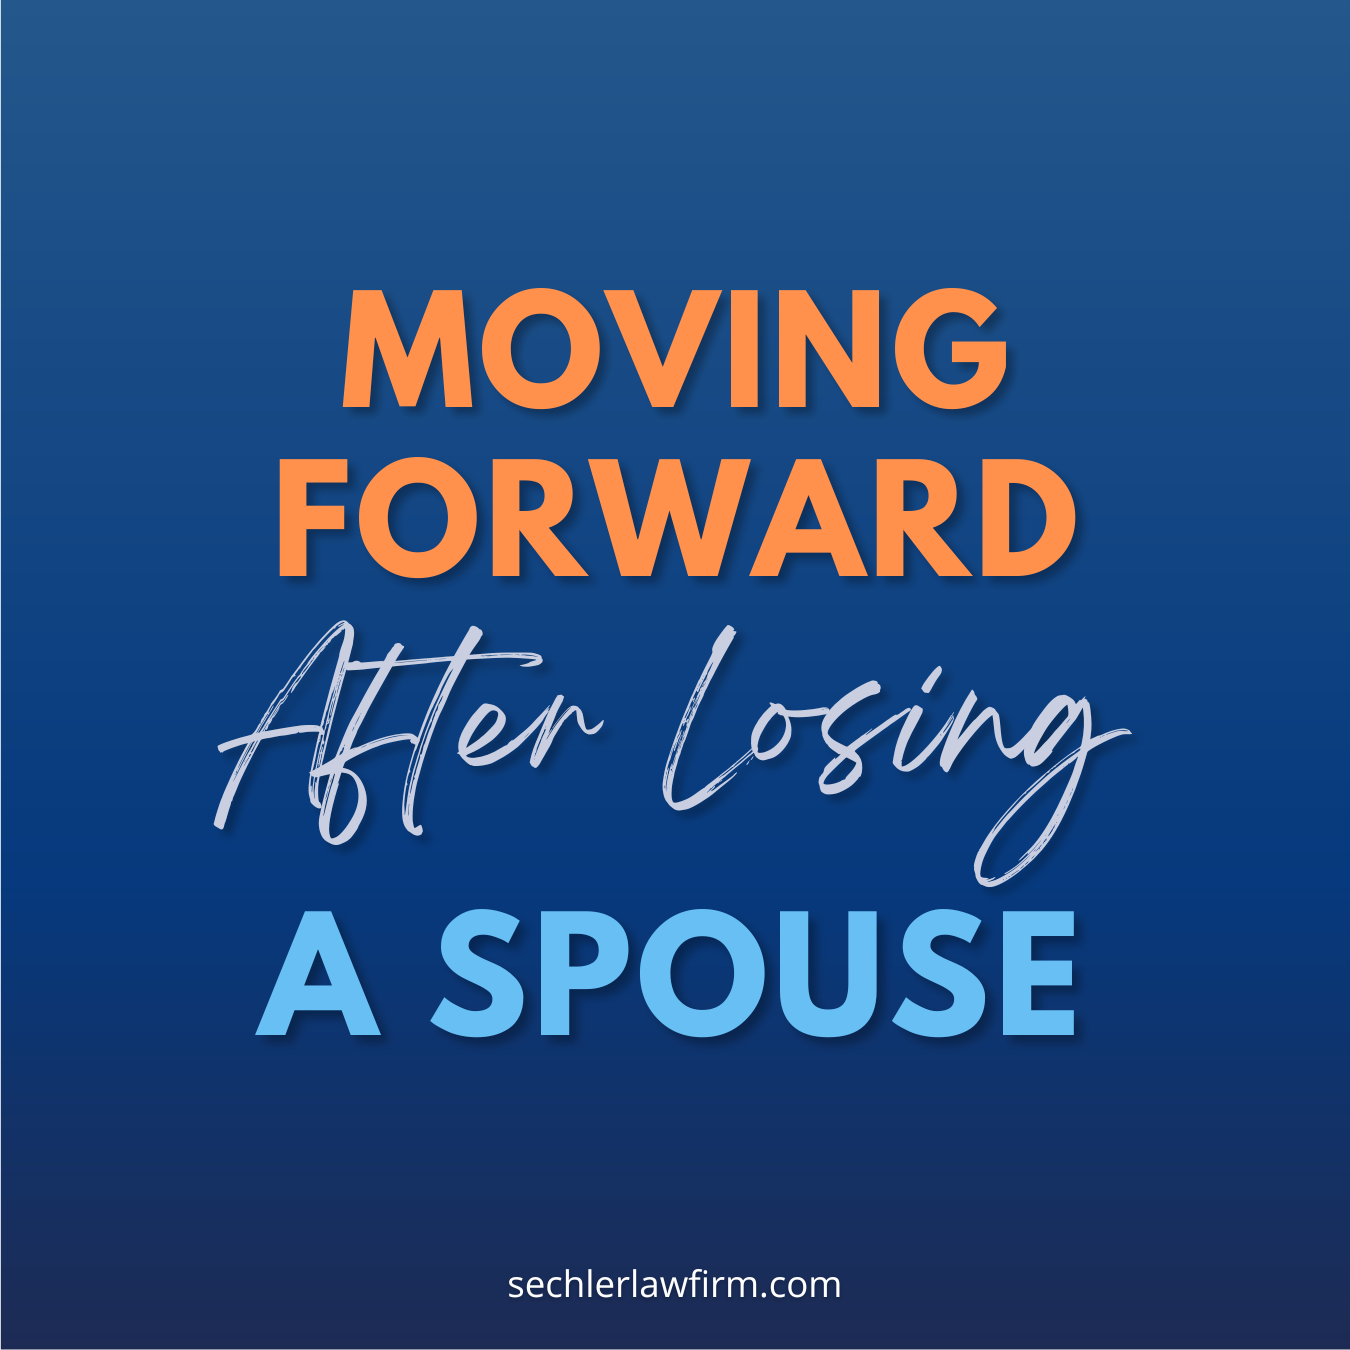 Moving Forward After Losing A Spouse